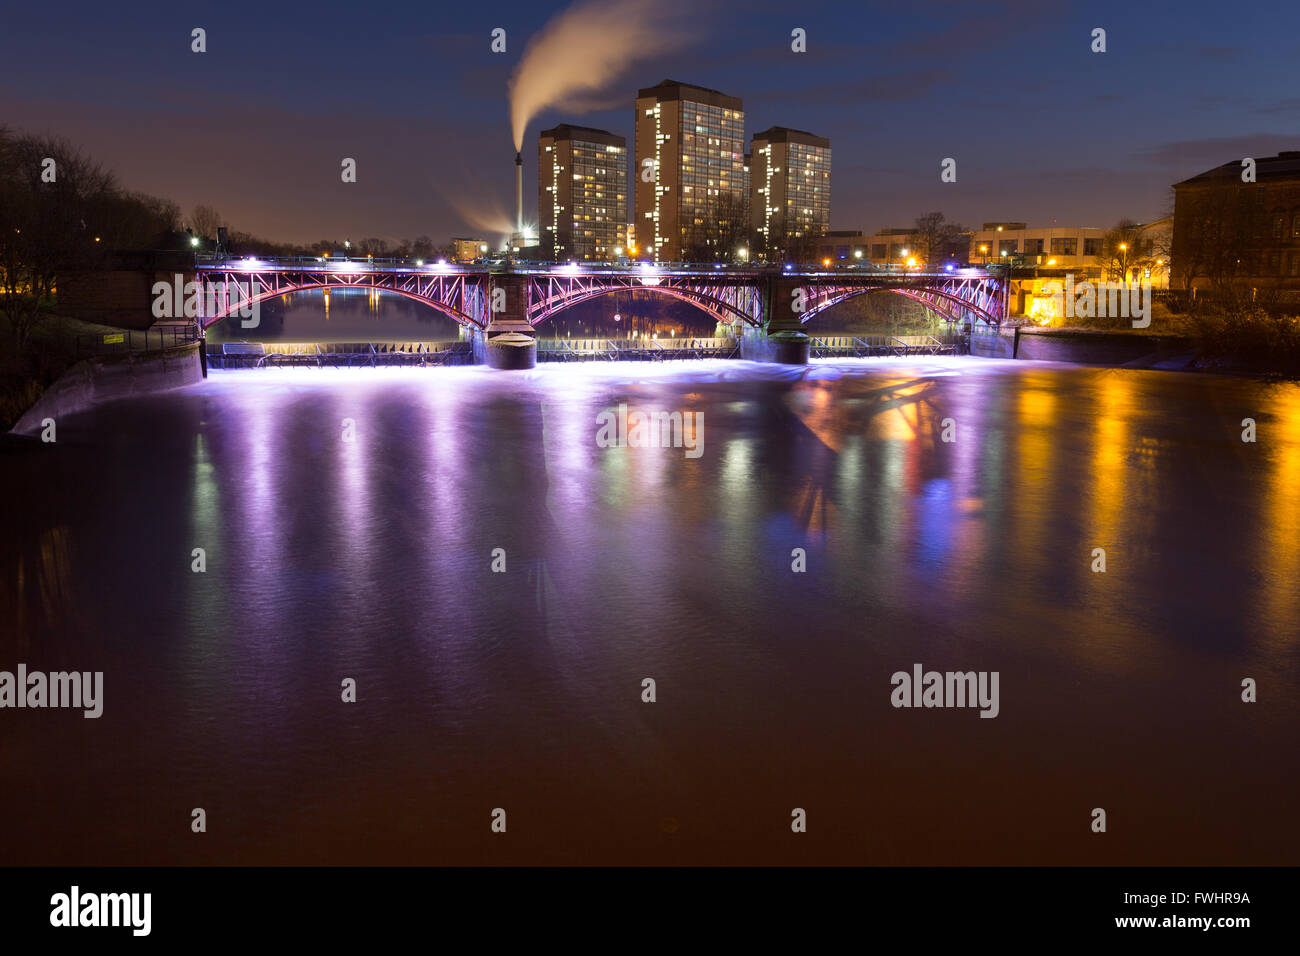 City of Glasgow, Scotland. Picturesque night view of the weir and pipe bridge over the River Clyde. Stock Photo